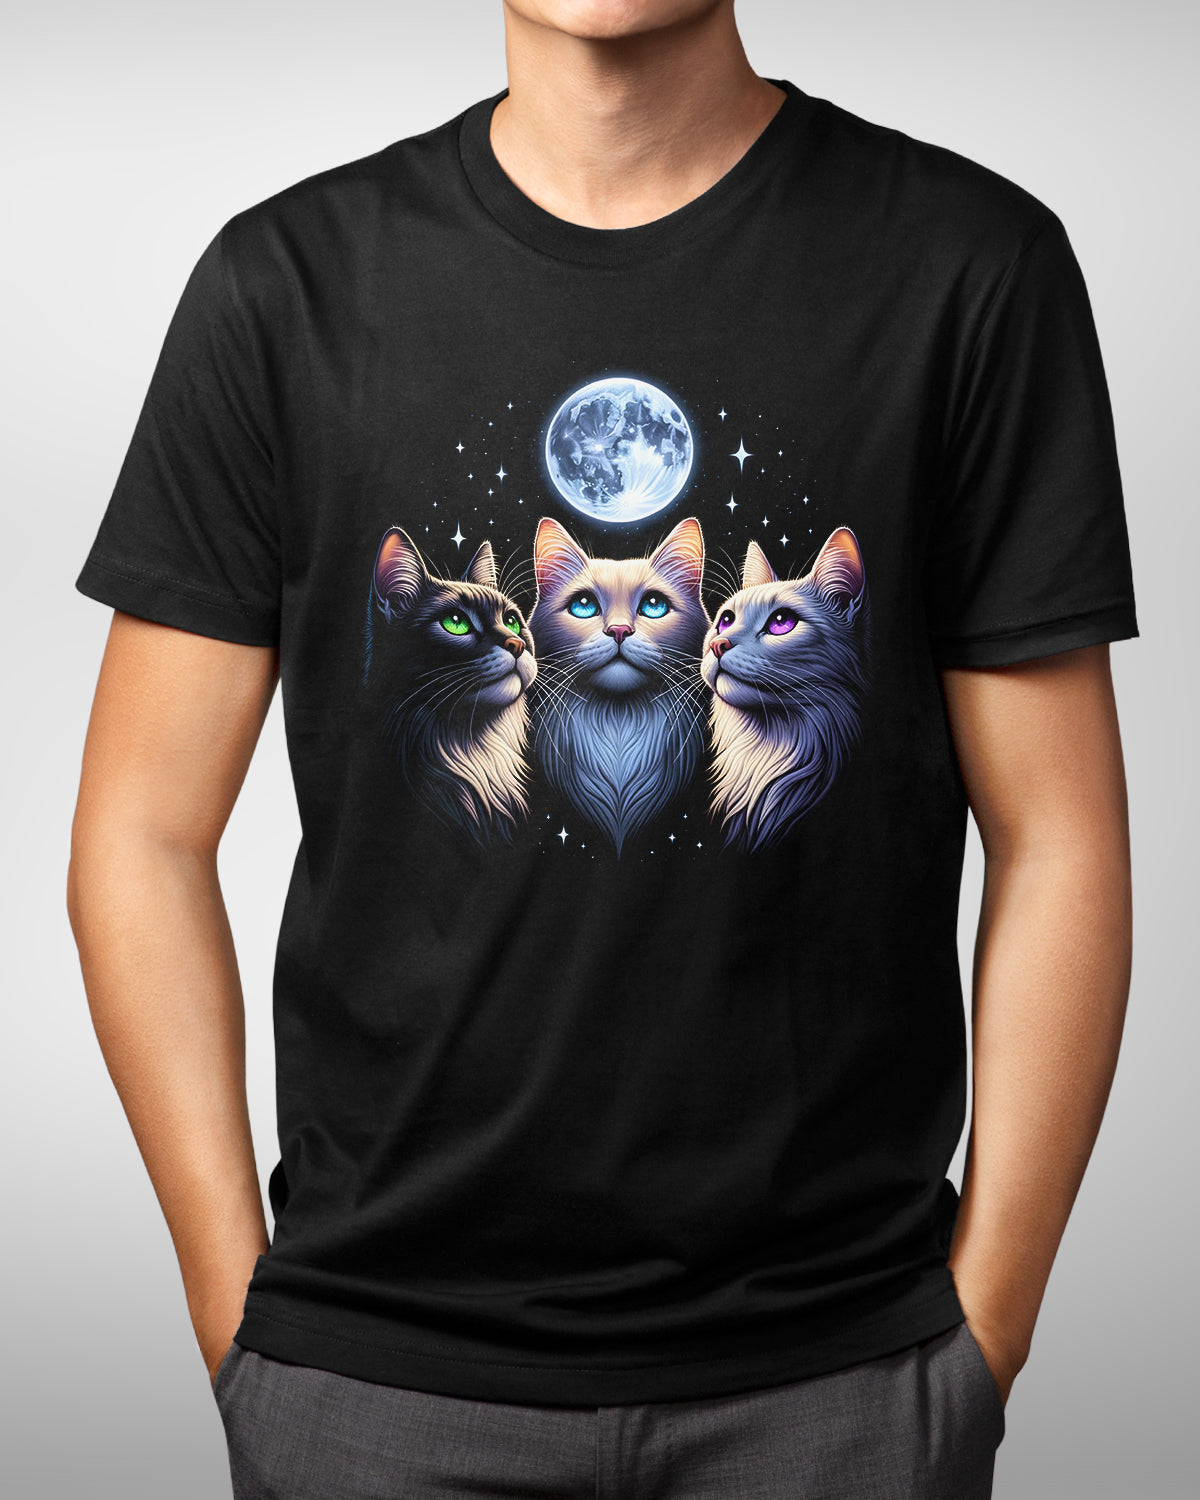 Three Cats Moon Shirt, Cute Cat Lover Tee for Cat Moms & Dads, Full Moon Cat Shirt, Astronomy Gift for Pet Lovers